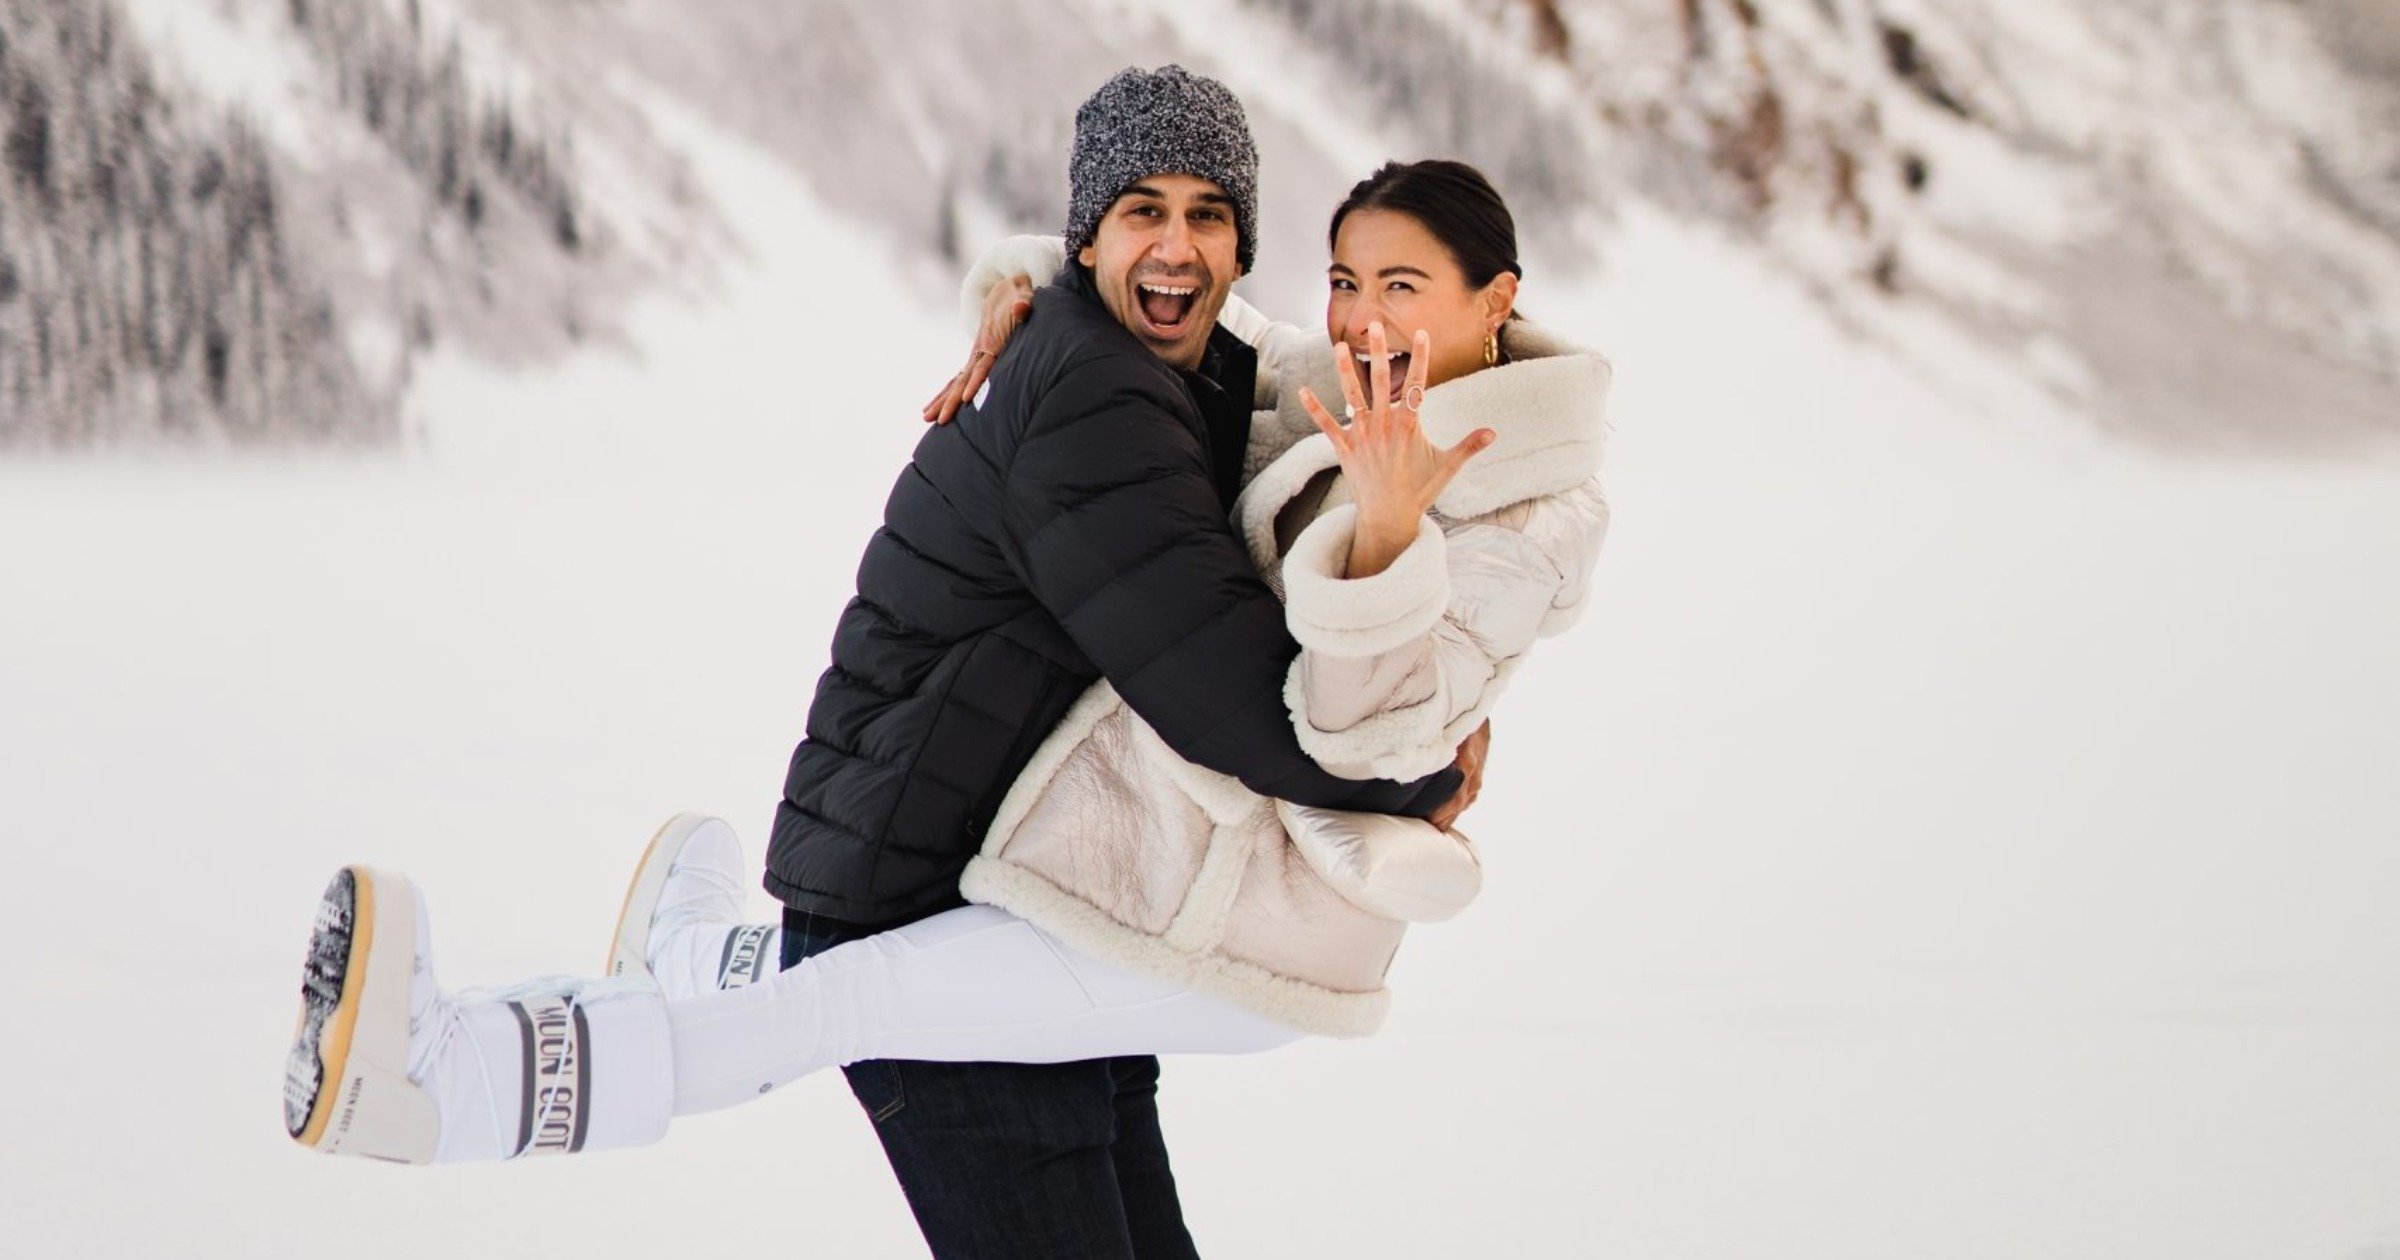 These Winter Proposals Are The Absolute Sweetest!